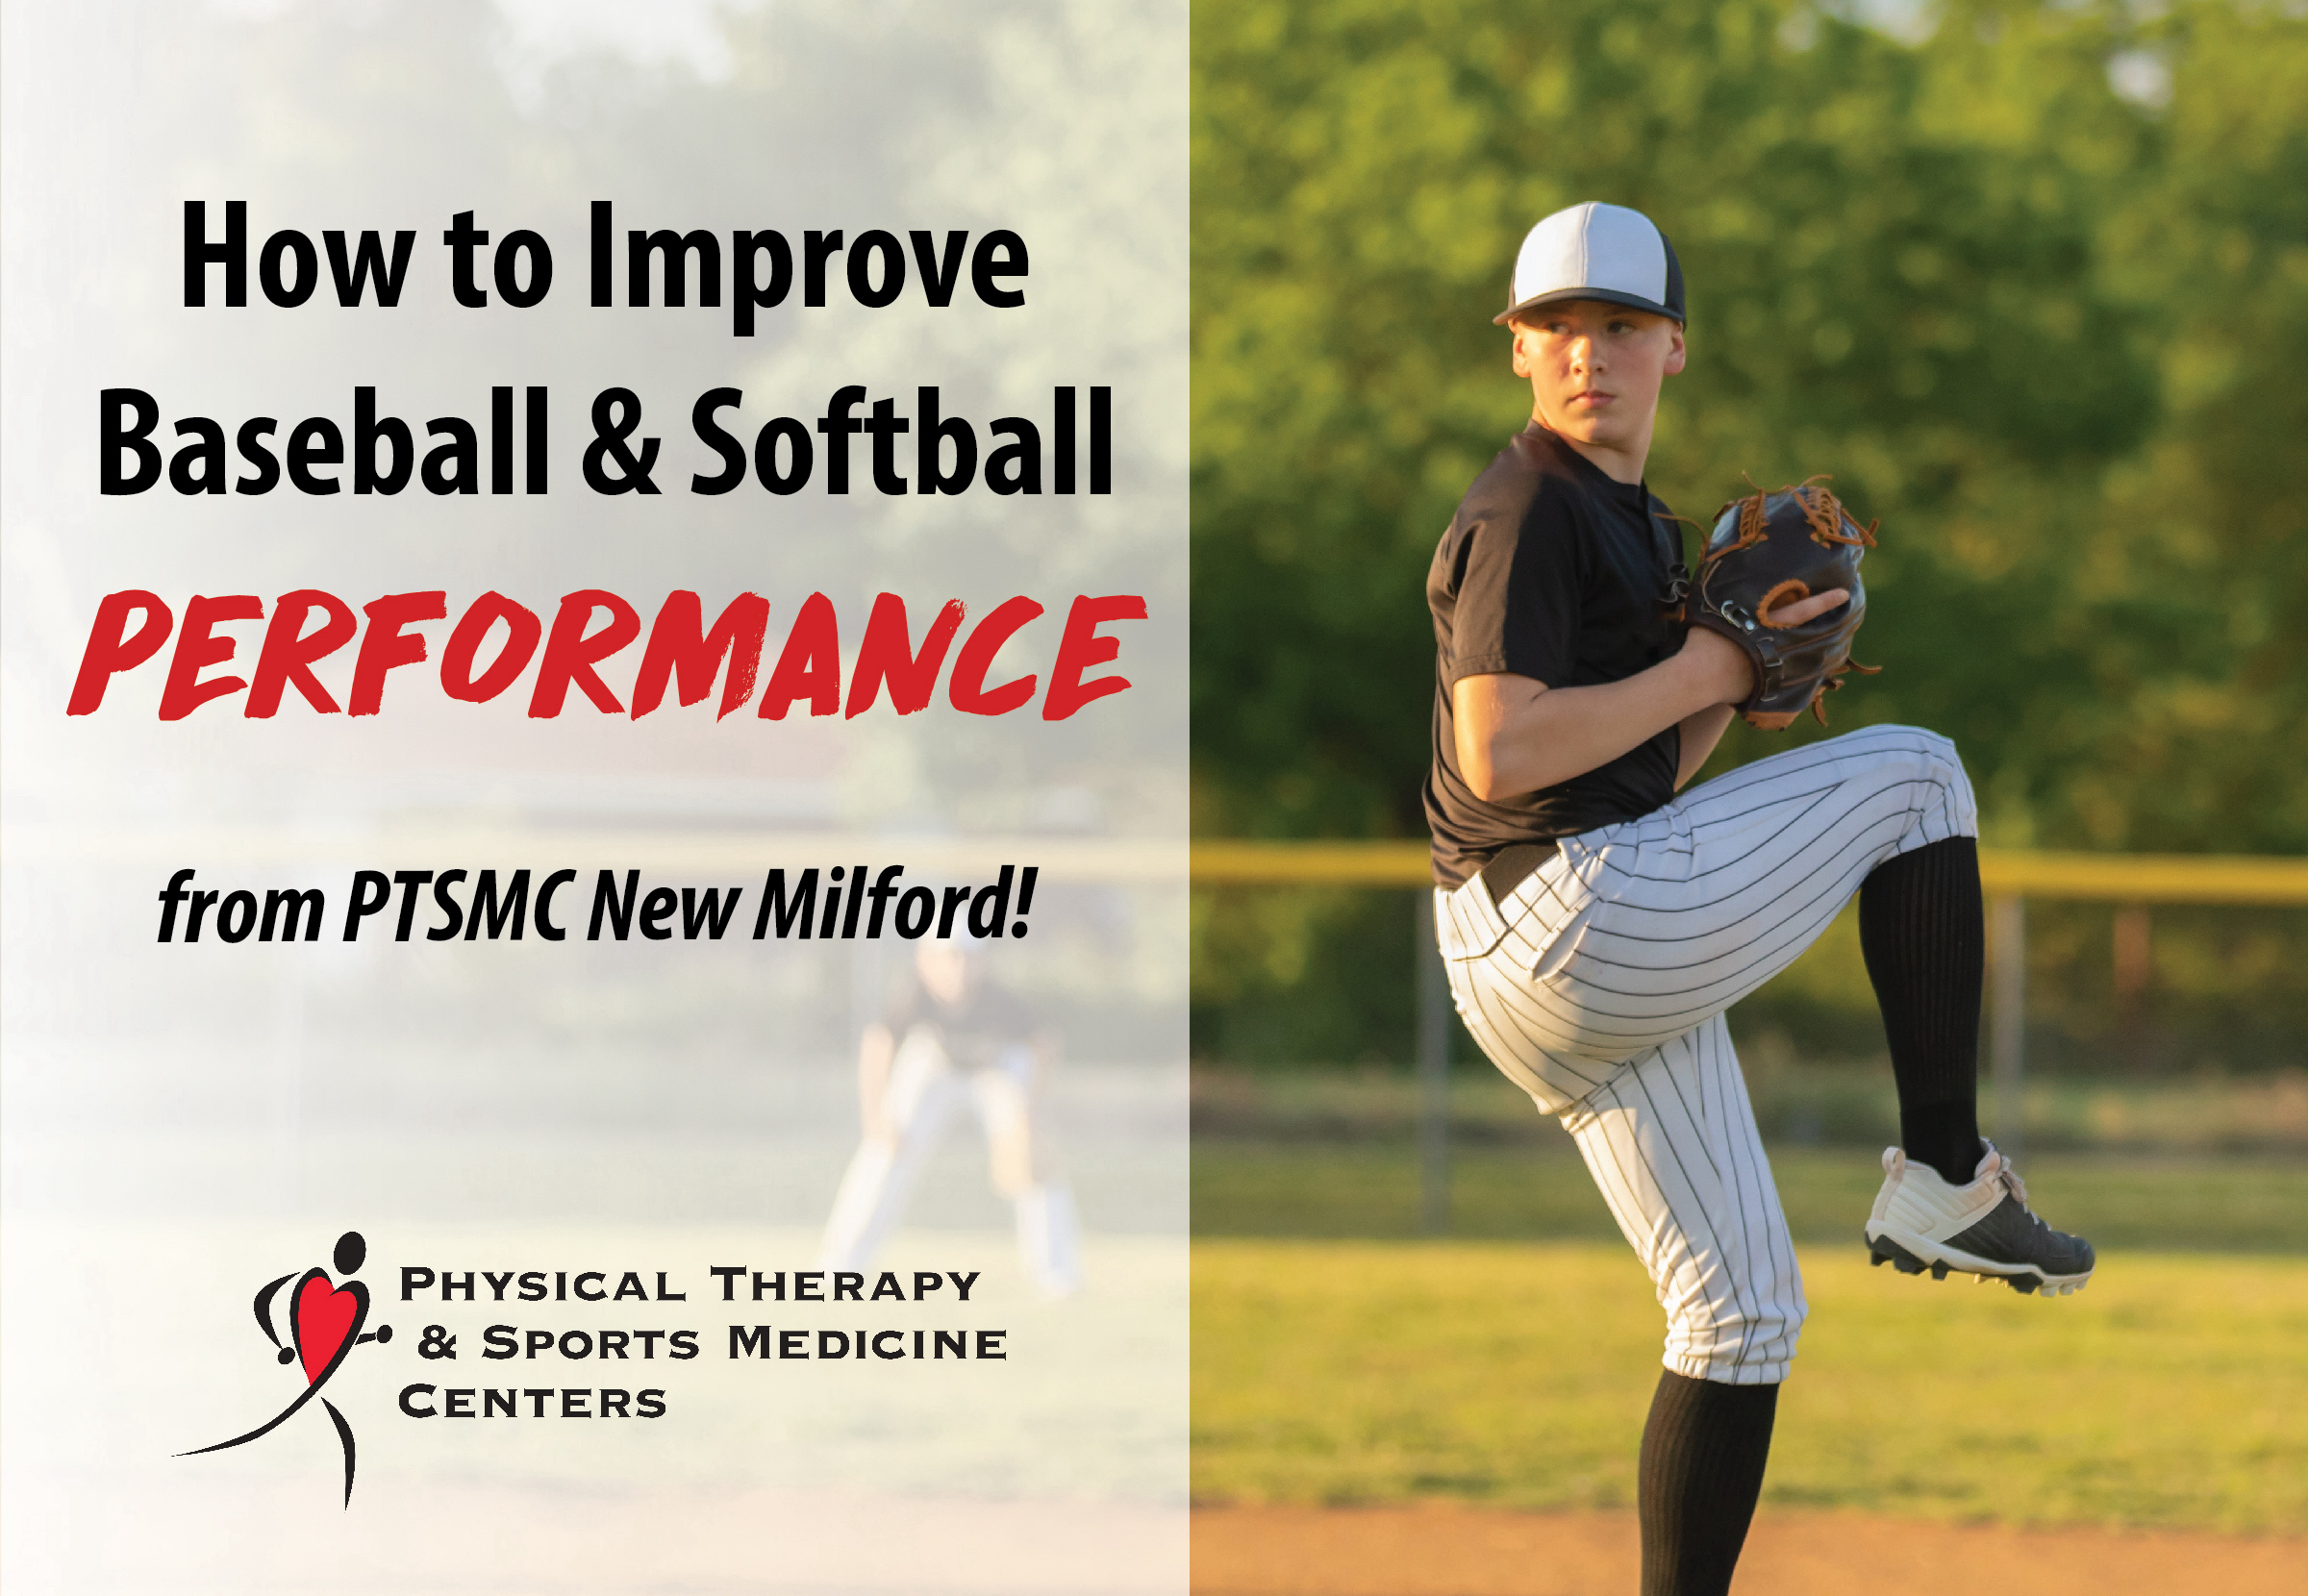 How to Improve Baseball & Softball Performance from PTSMC New Milford, sports medicine physical therapy